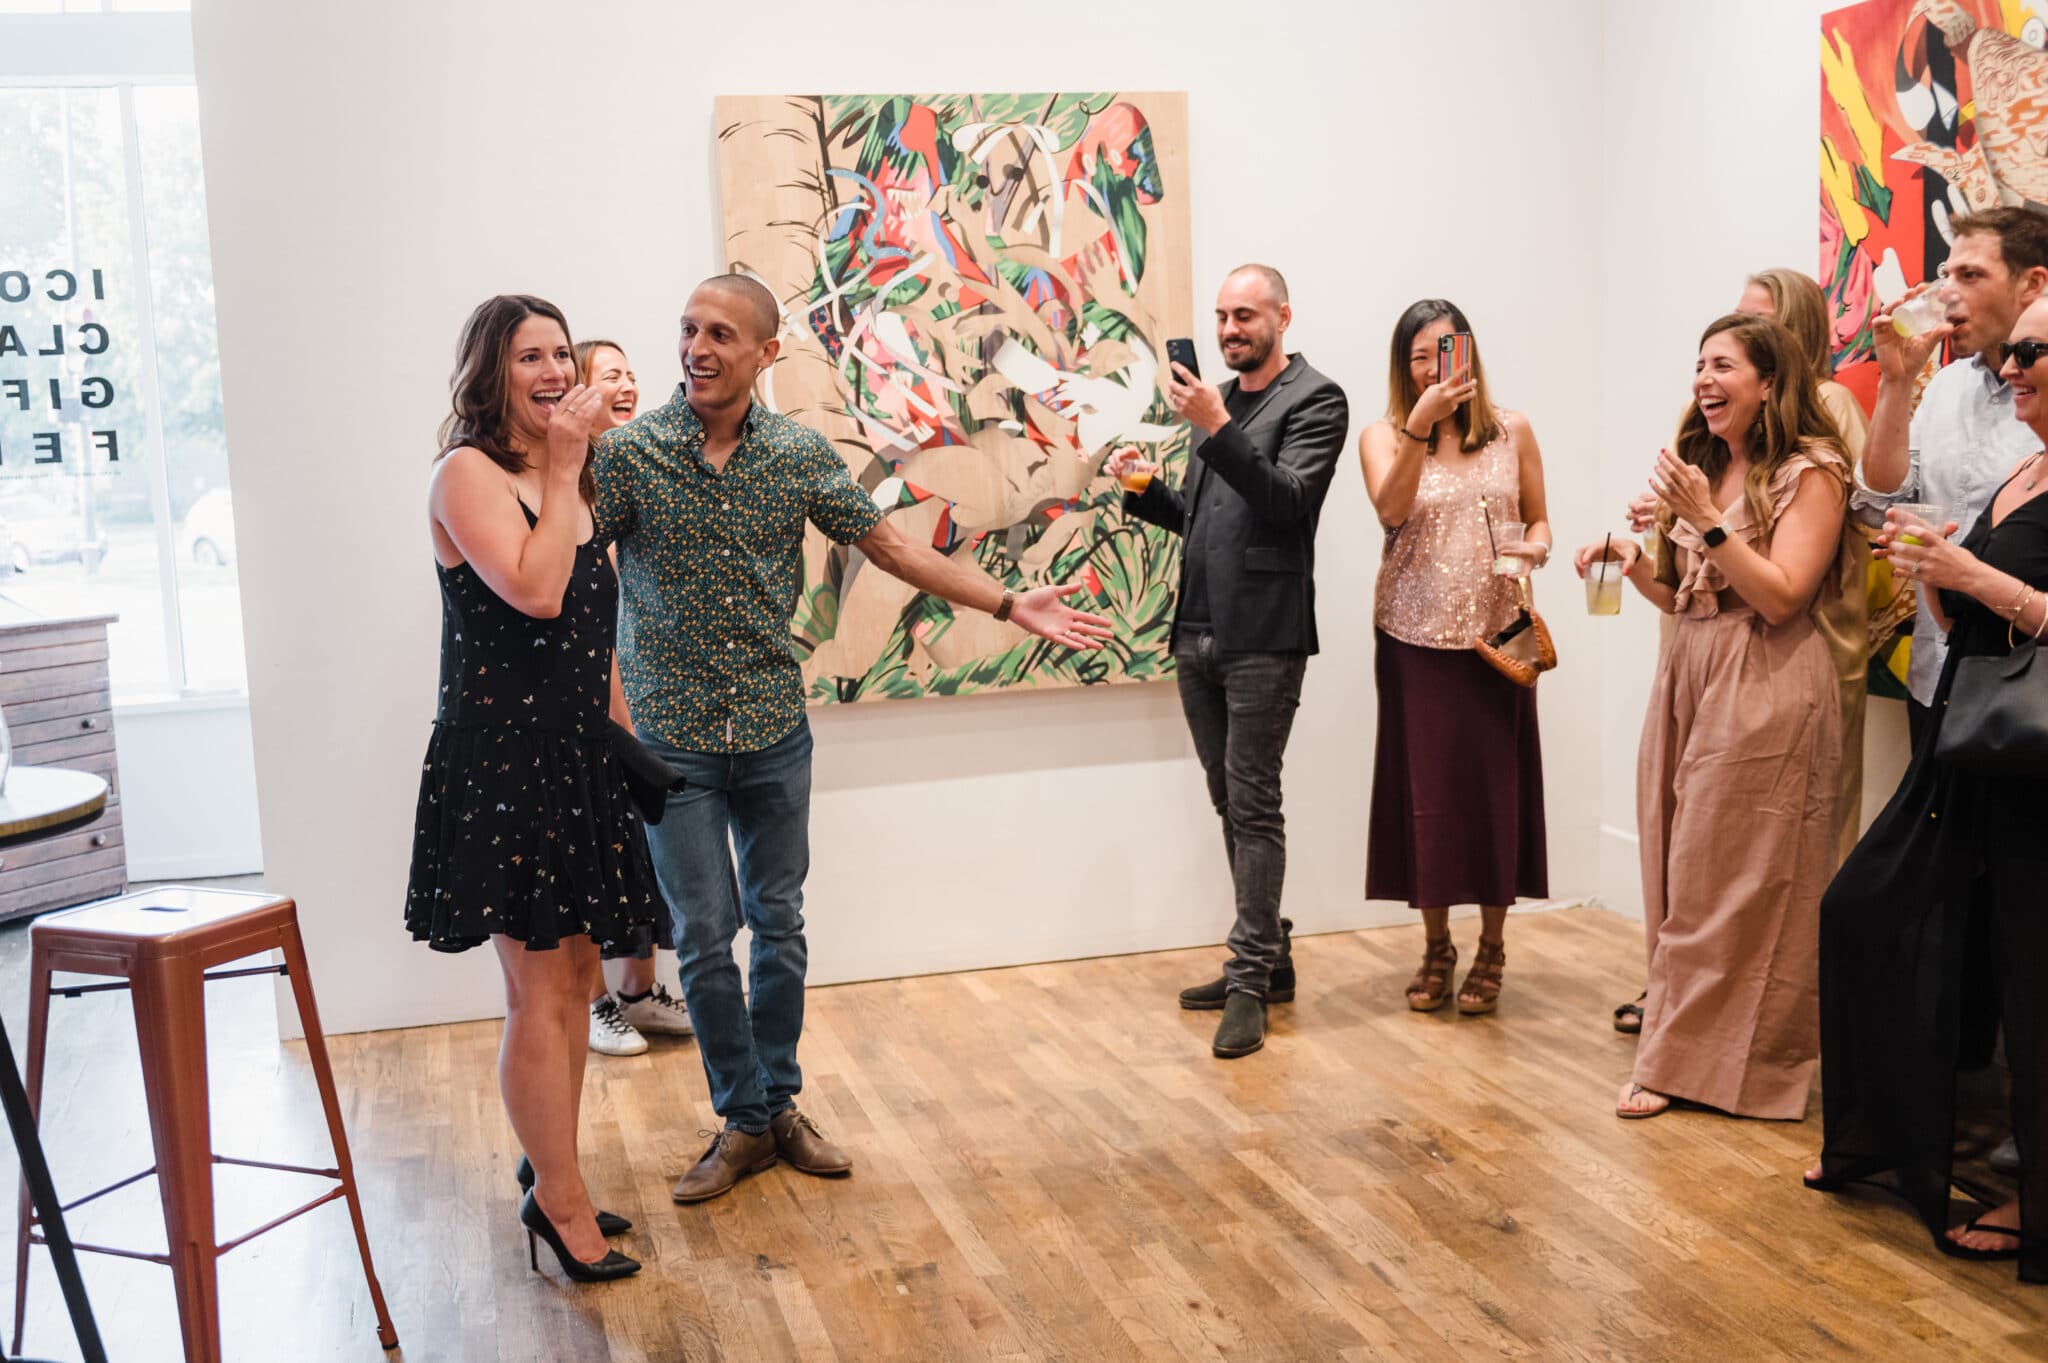 A woman enters an art gallery and realizes the group of people there are holding a surprise party in her honor.